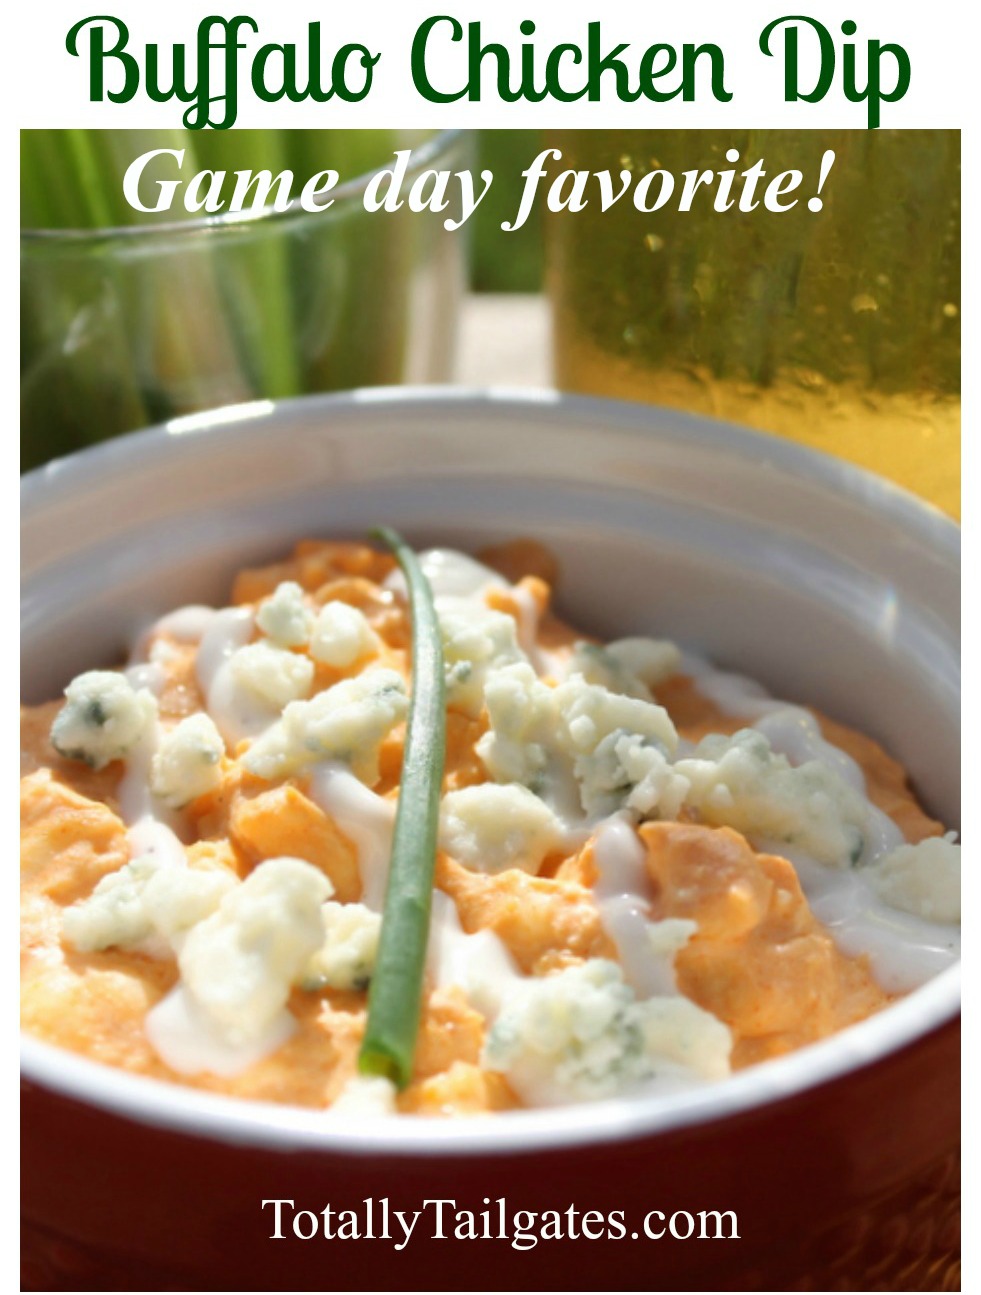 Game day classic appetizer! This Buffalo Chicken Dip recipe is the BEST!